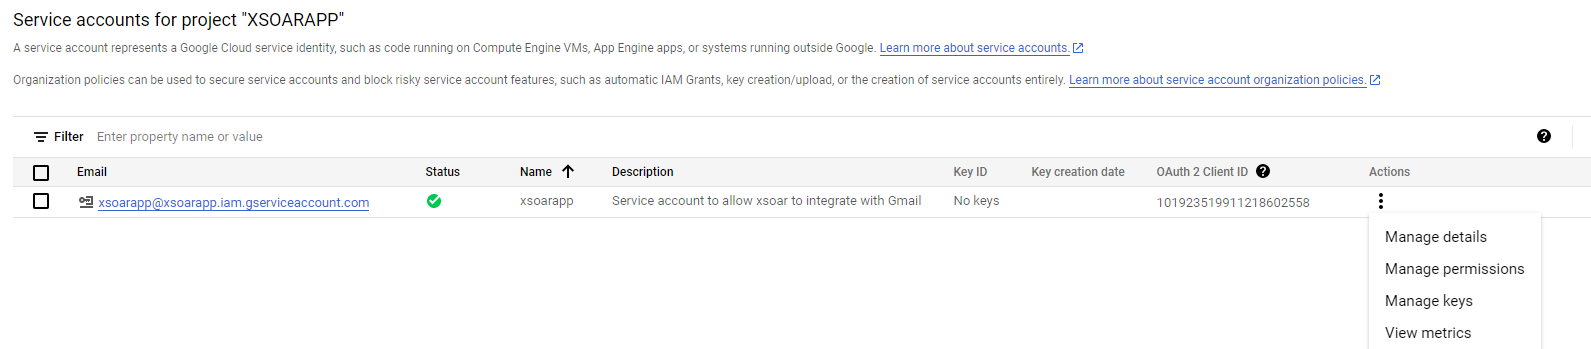 gmail_section1_step8